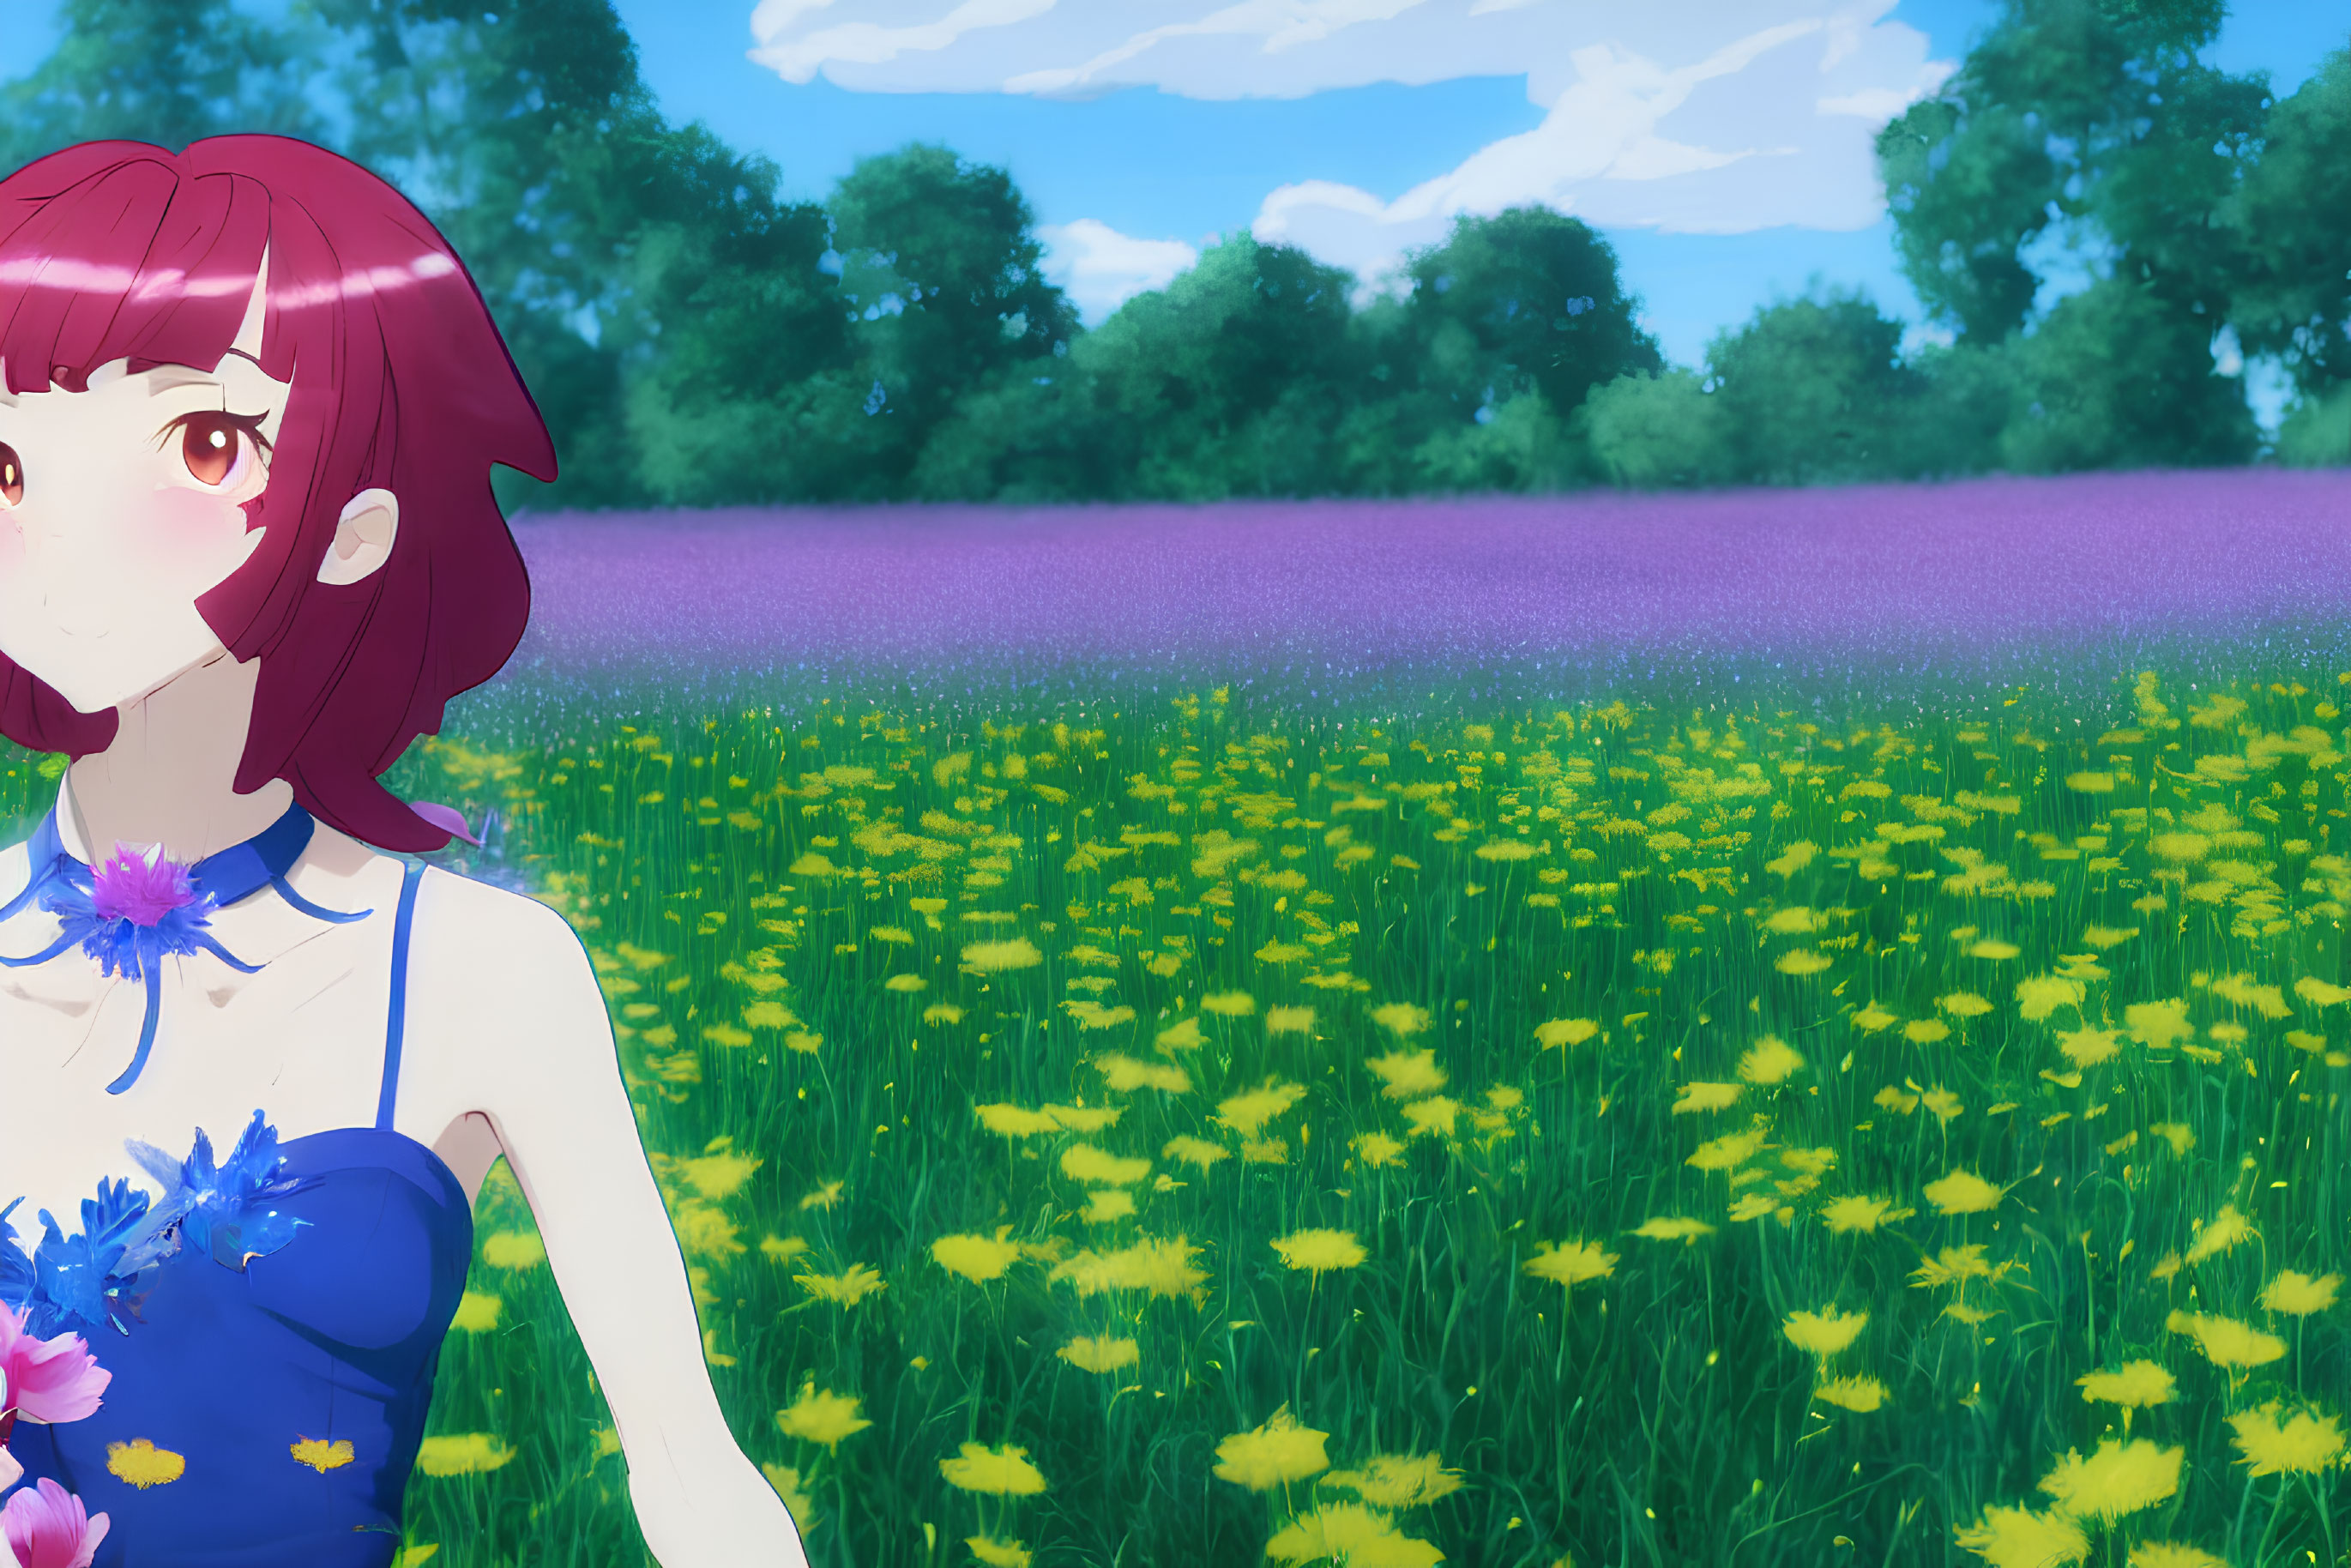 Purple-haired anime girl in blue floral dress surrounded by yellow flowers, lavender field, and blue sky.